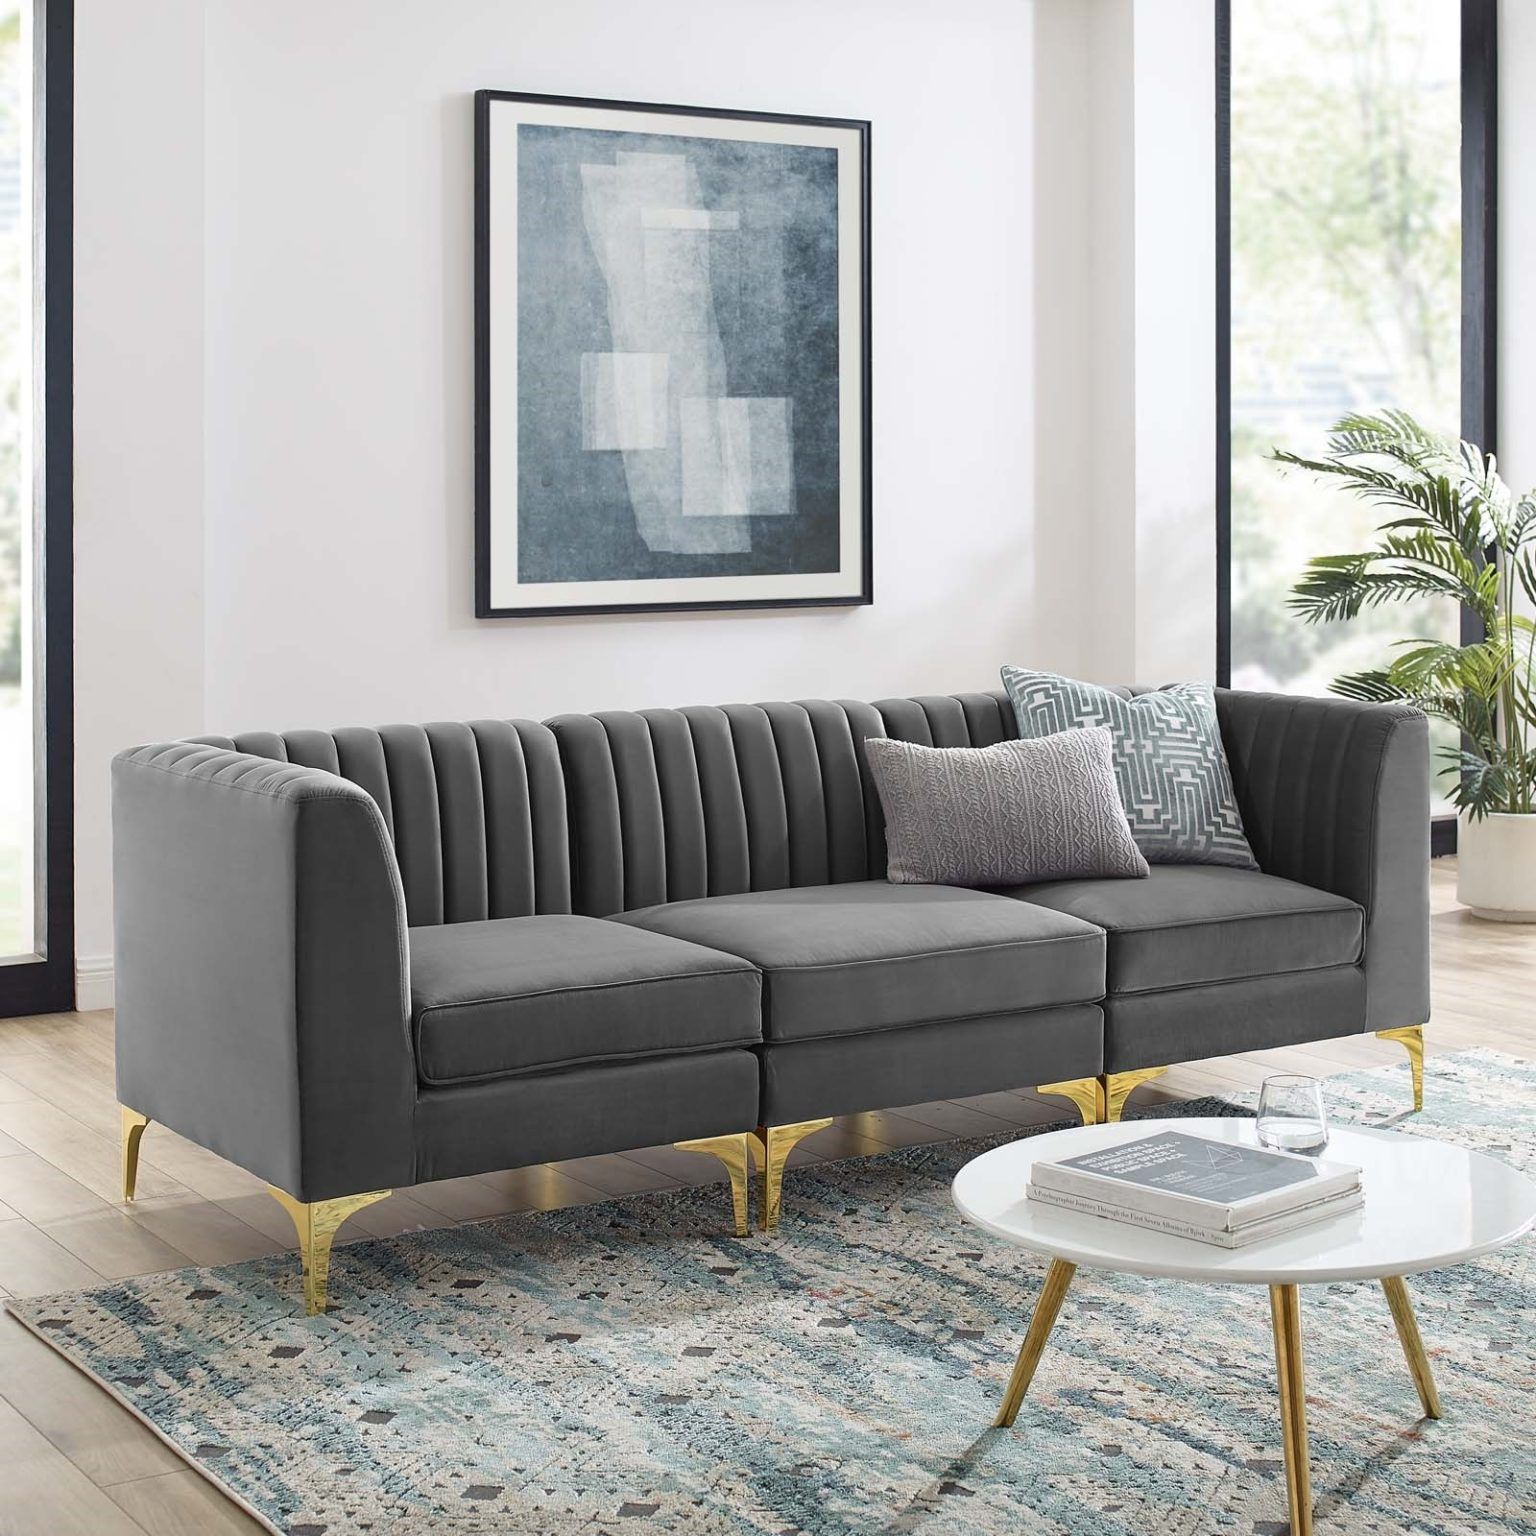 Triumph Channel Tufted Performance Velvet 3 Seater Sofa In Gray – Hyme For Tufted Upholstered Sofas (Gallery 5 of 20)